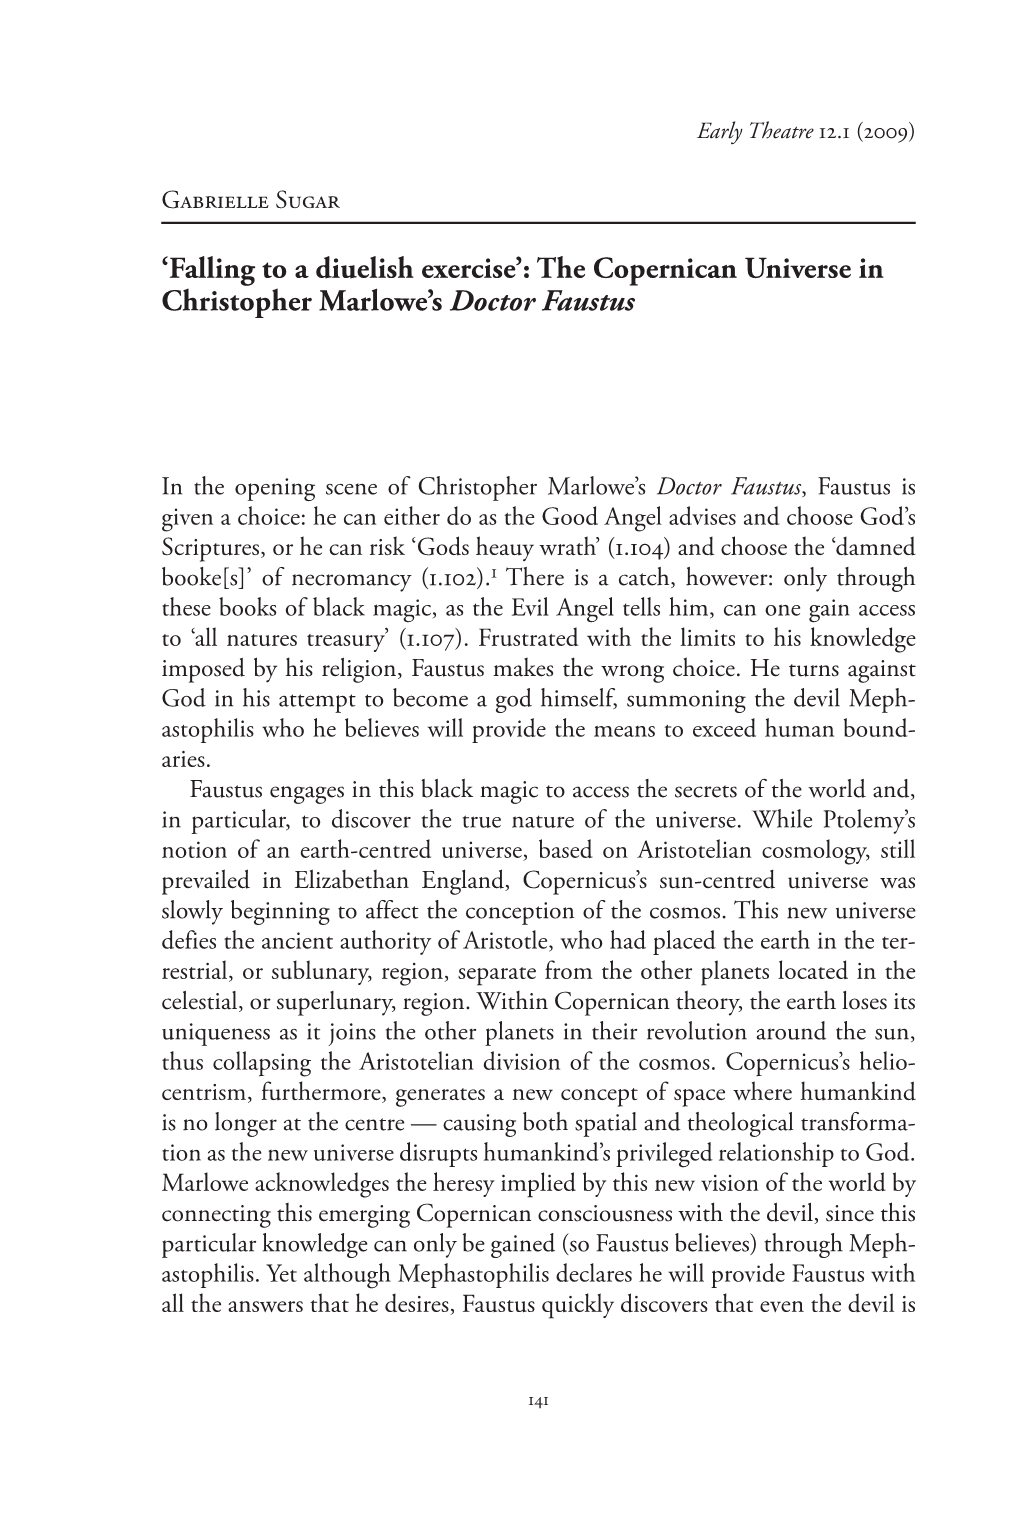 'Falling to a Diuelish Exercise': the Copernican Universe in Christopher Marlowe's Doctor Faustus